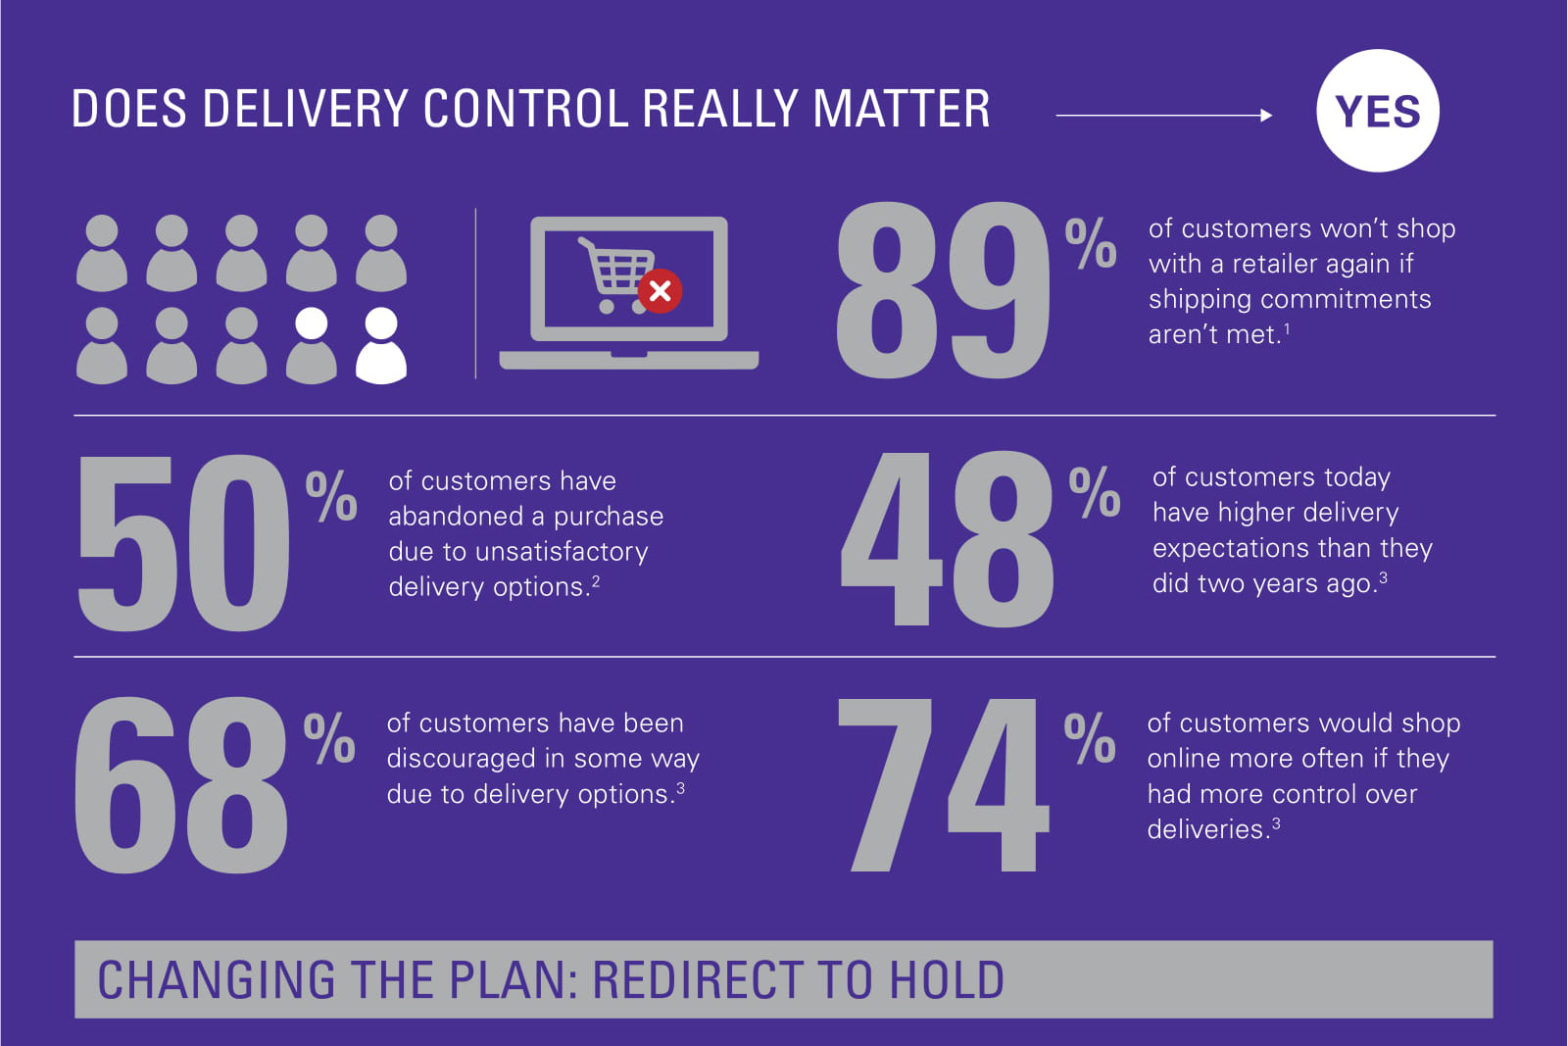 Does delivery ontrol really matter? Yes.